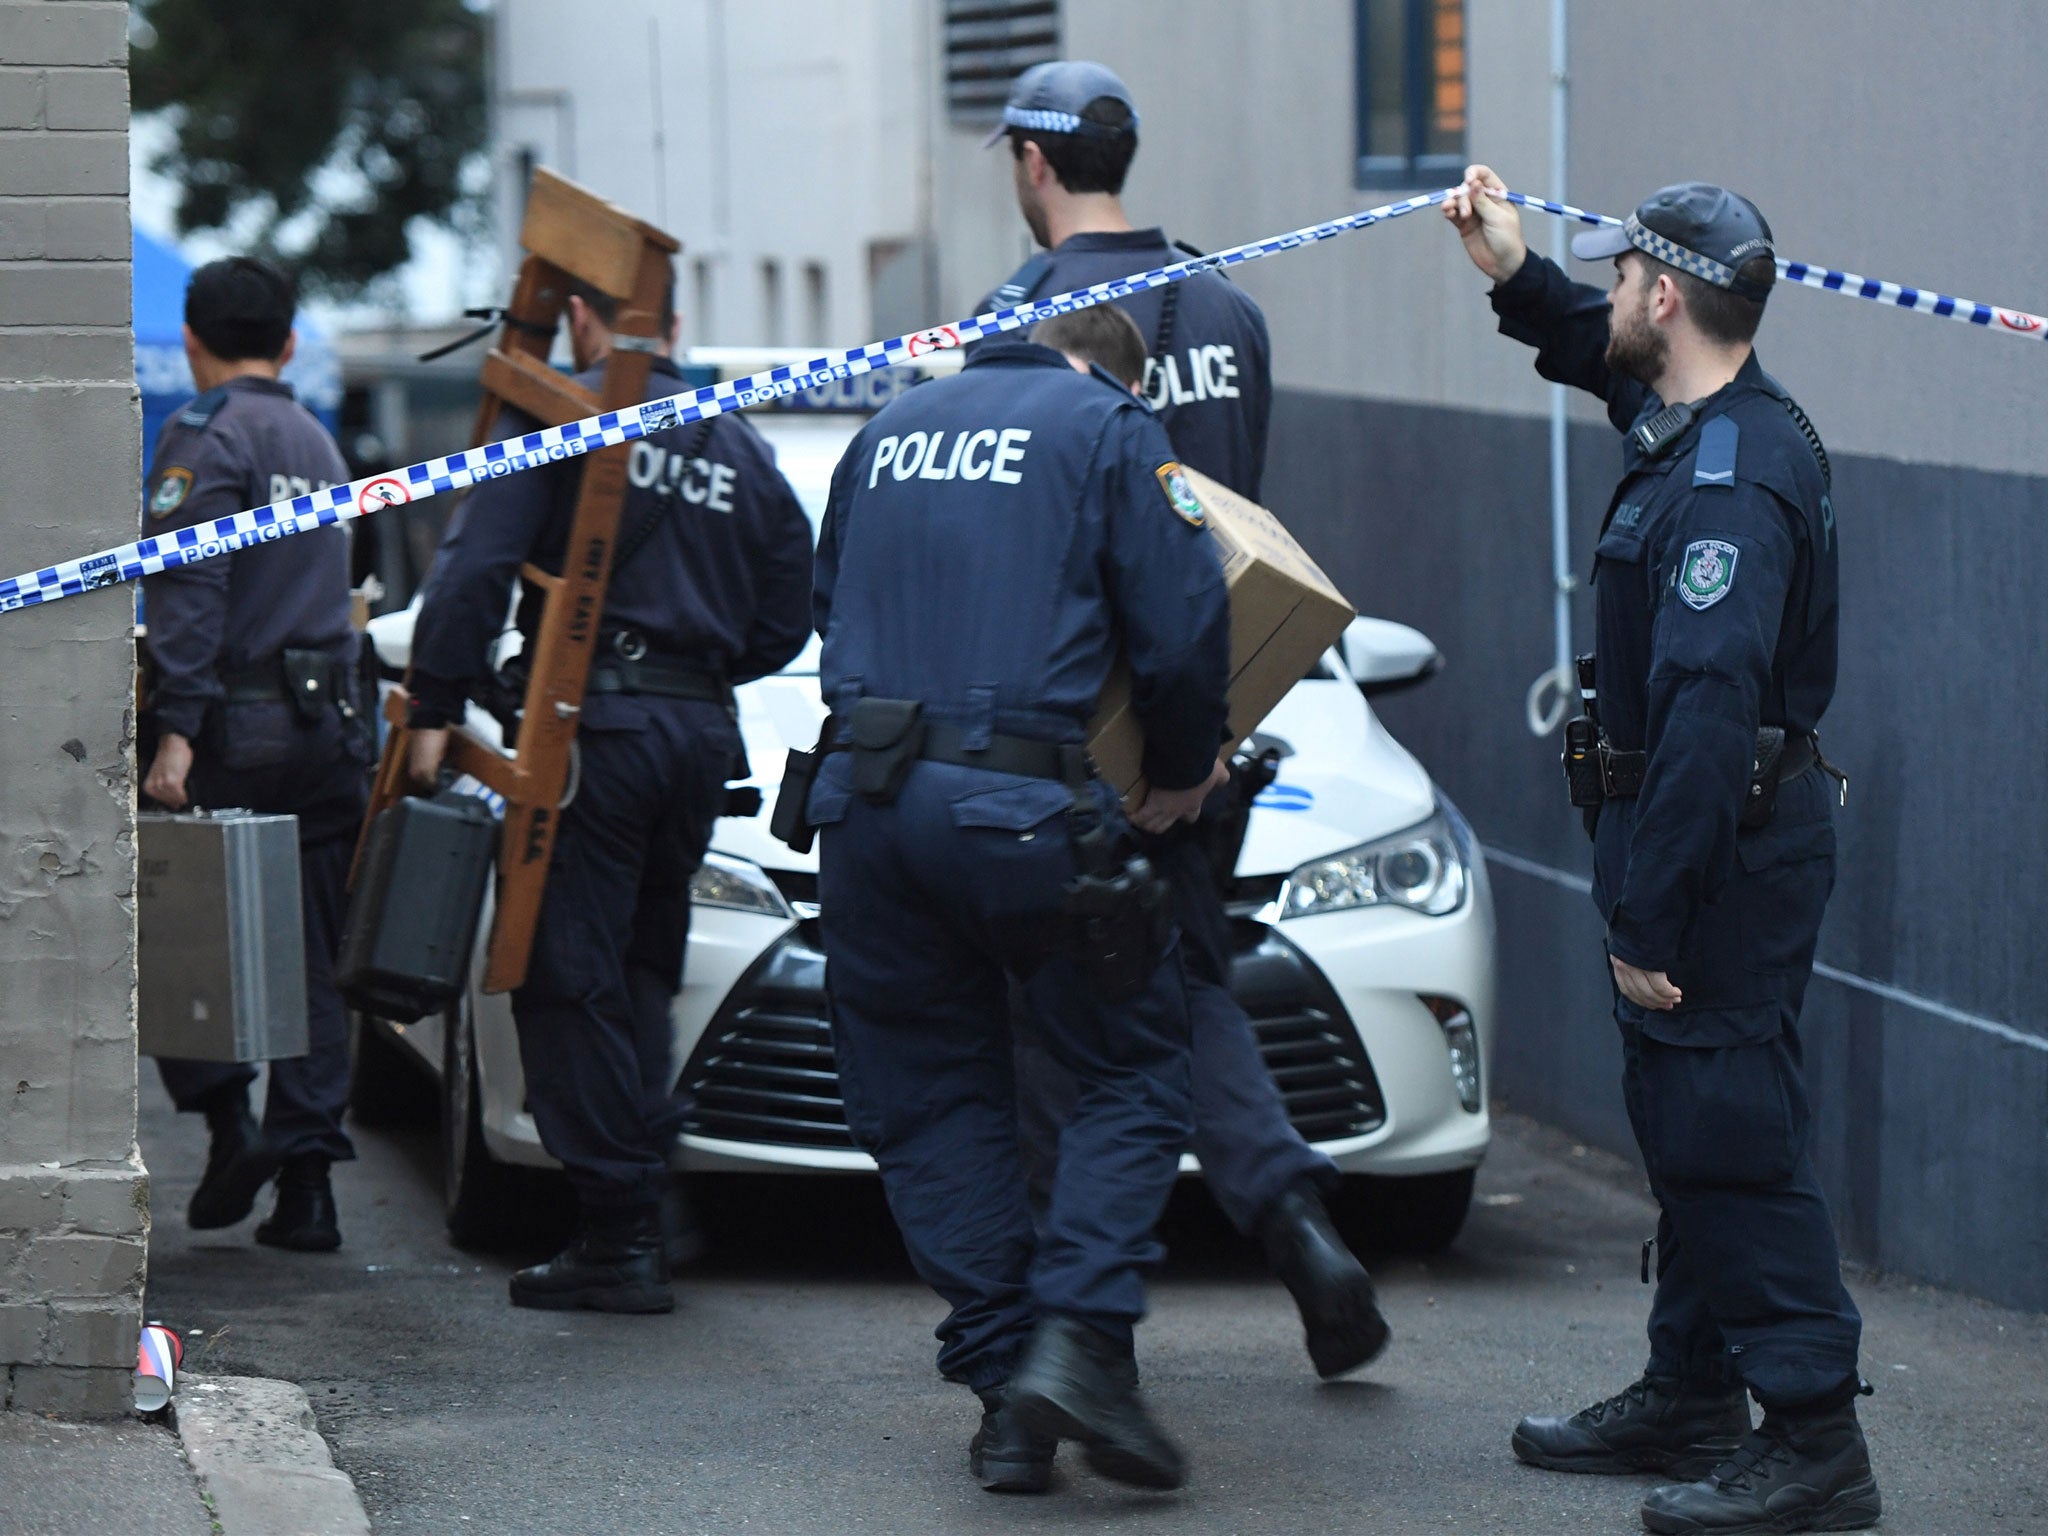 Police probing the alleged plot to target an airliner raid a property in the Sydney suburb of Surry Hills